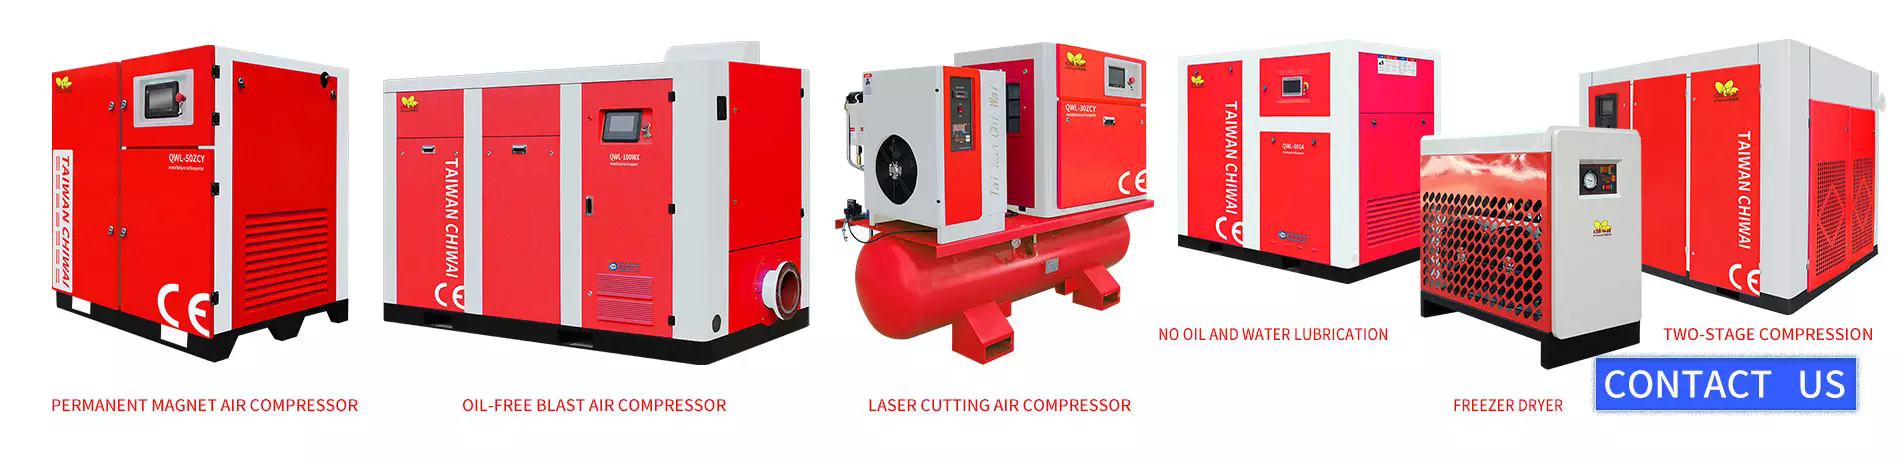 Air compressors suitable for different occasions